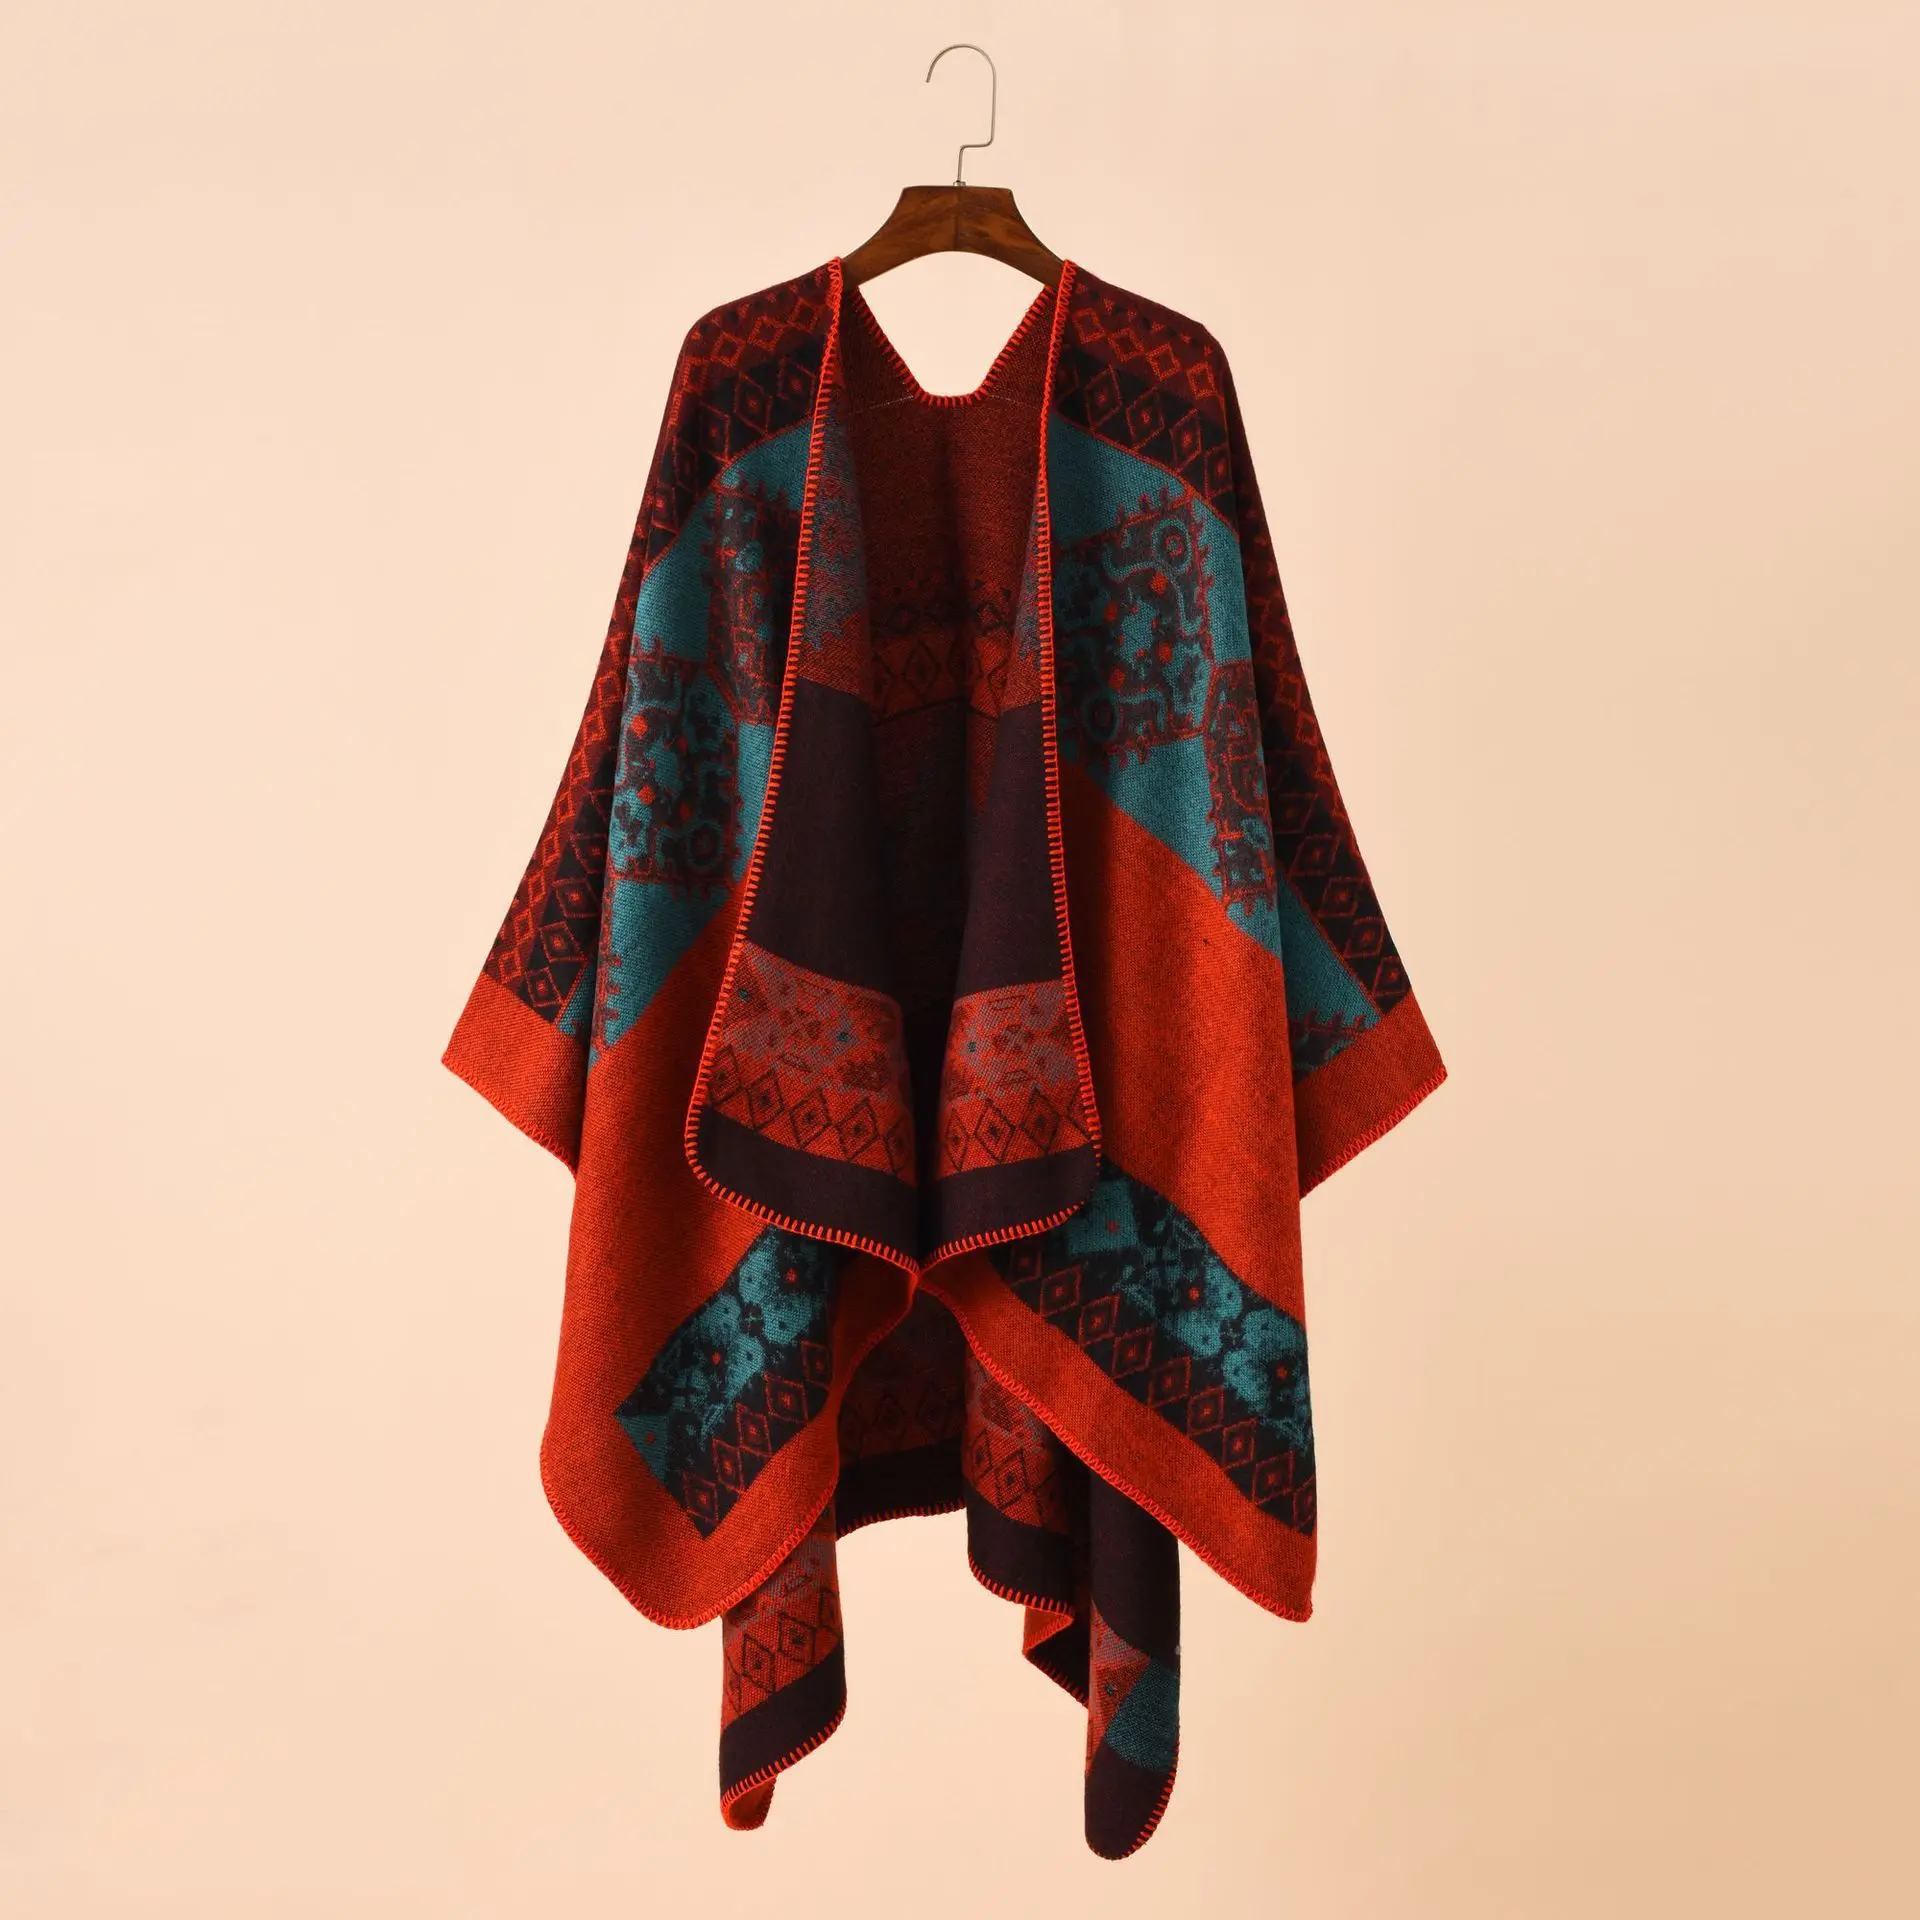 Spring Autumn New European American Color Grid Pattern Travel Warm Imitation Cashmere Shawl Cloak Printed Scarf Red